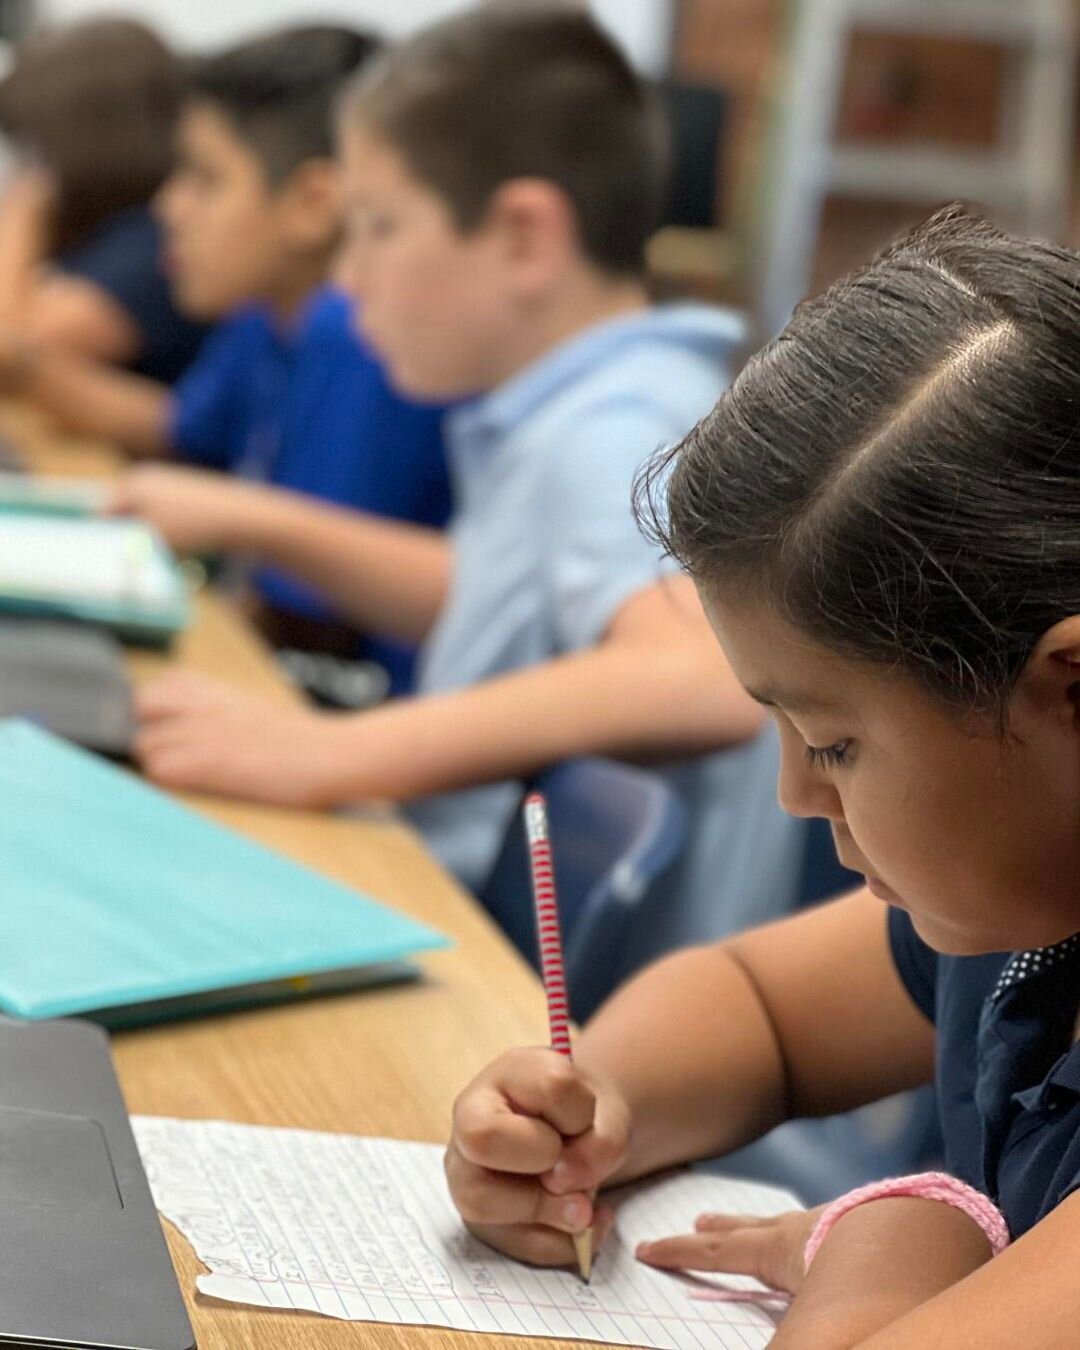 Middle school students in south phoenix putting in a lot of effort into completing their homework. 📝 🎒 #mentorkidsusa #sppn #homework #buildingleaders